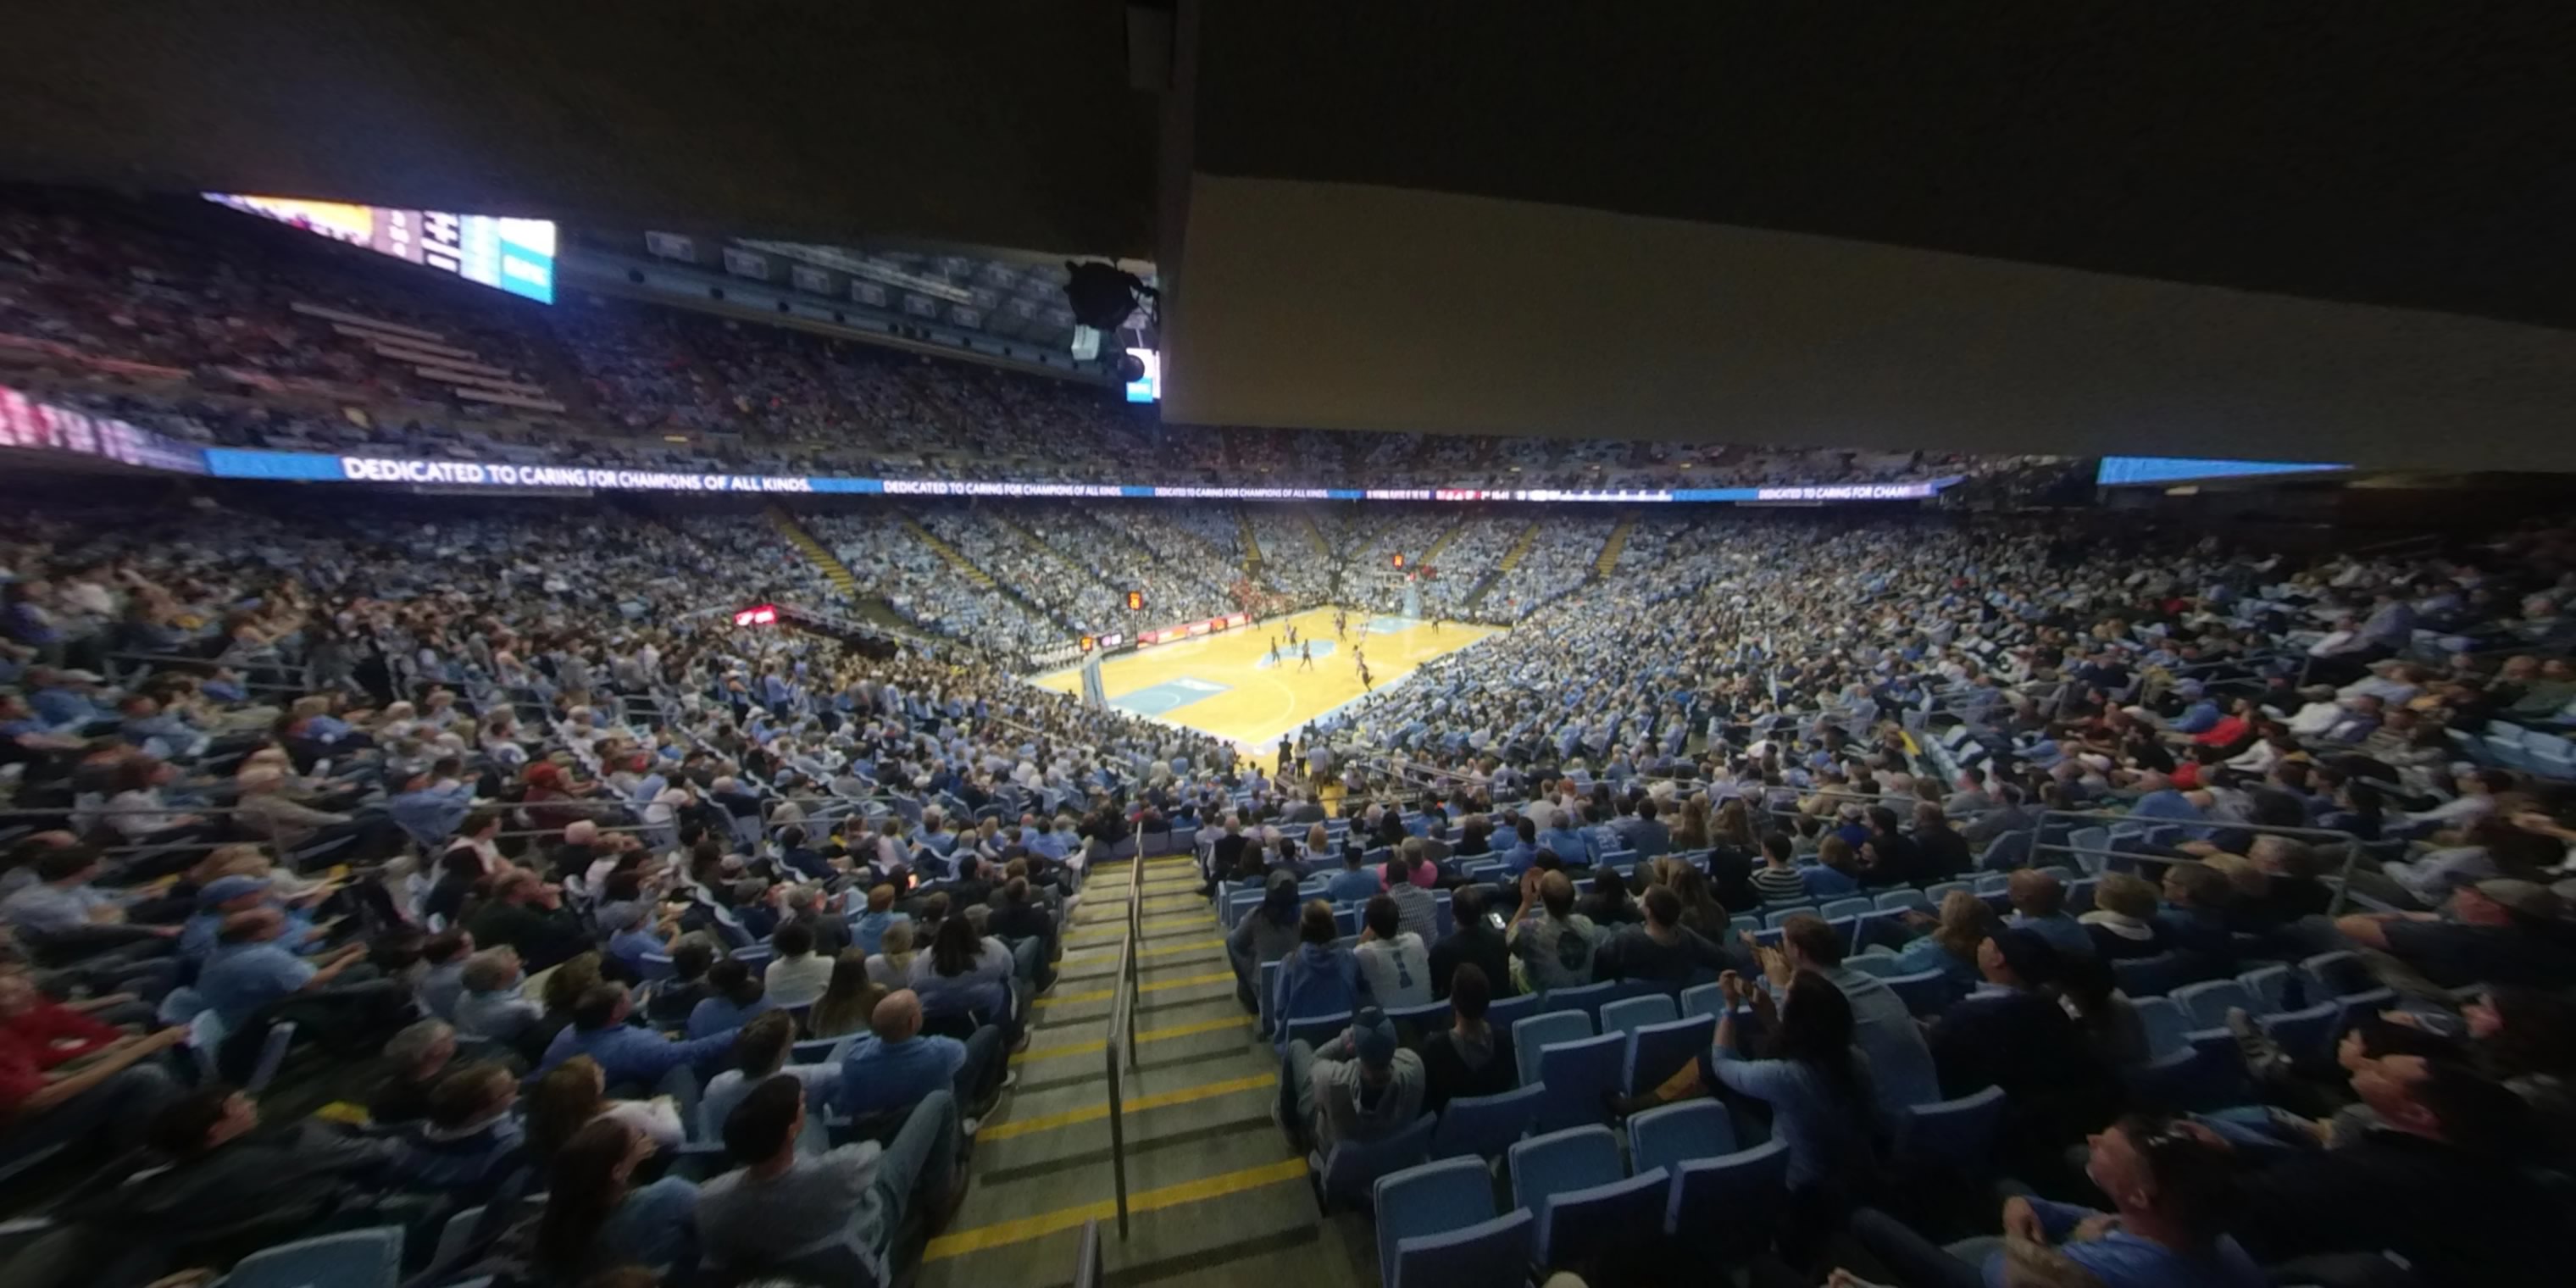 section 120 panoramic seat view  - dean smith center